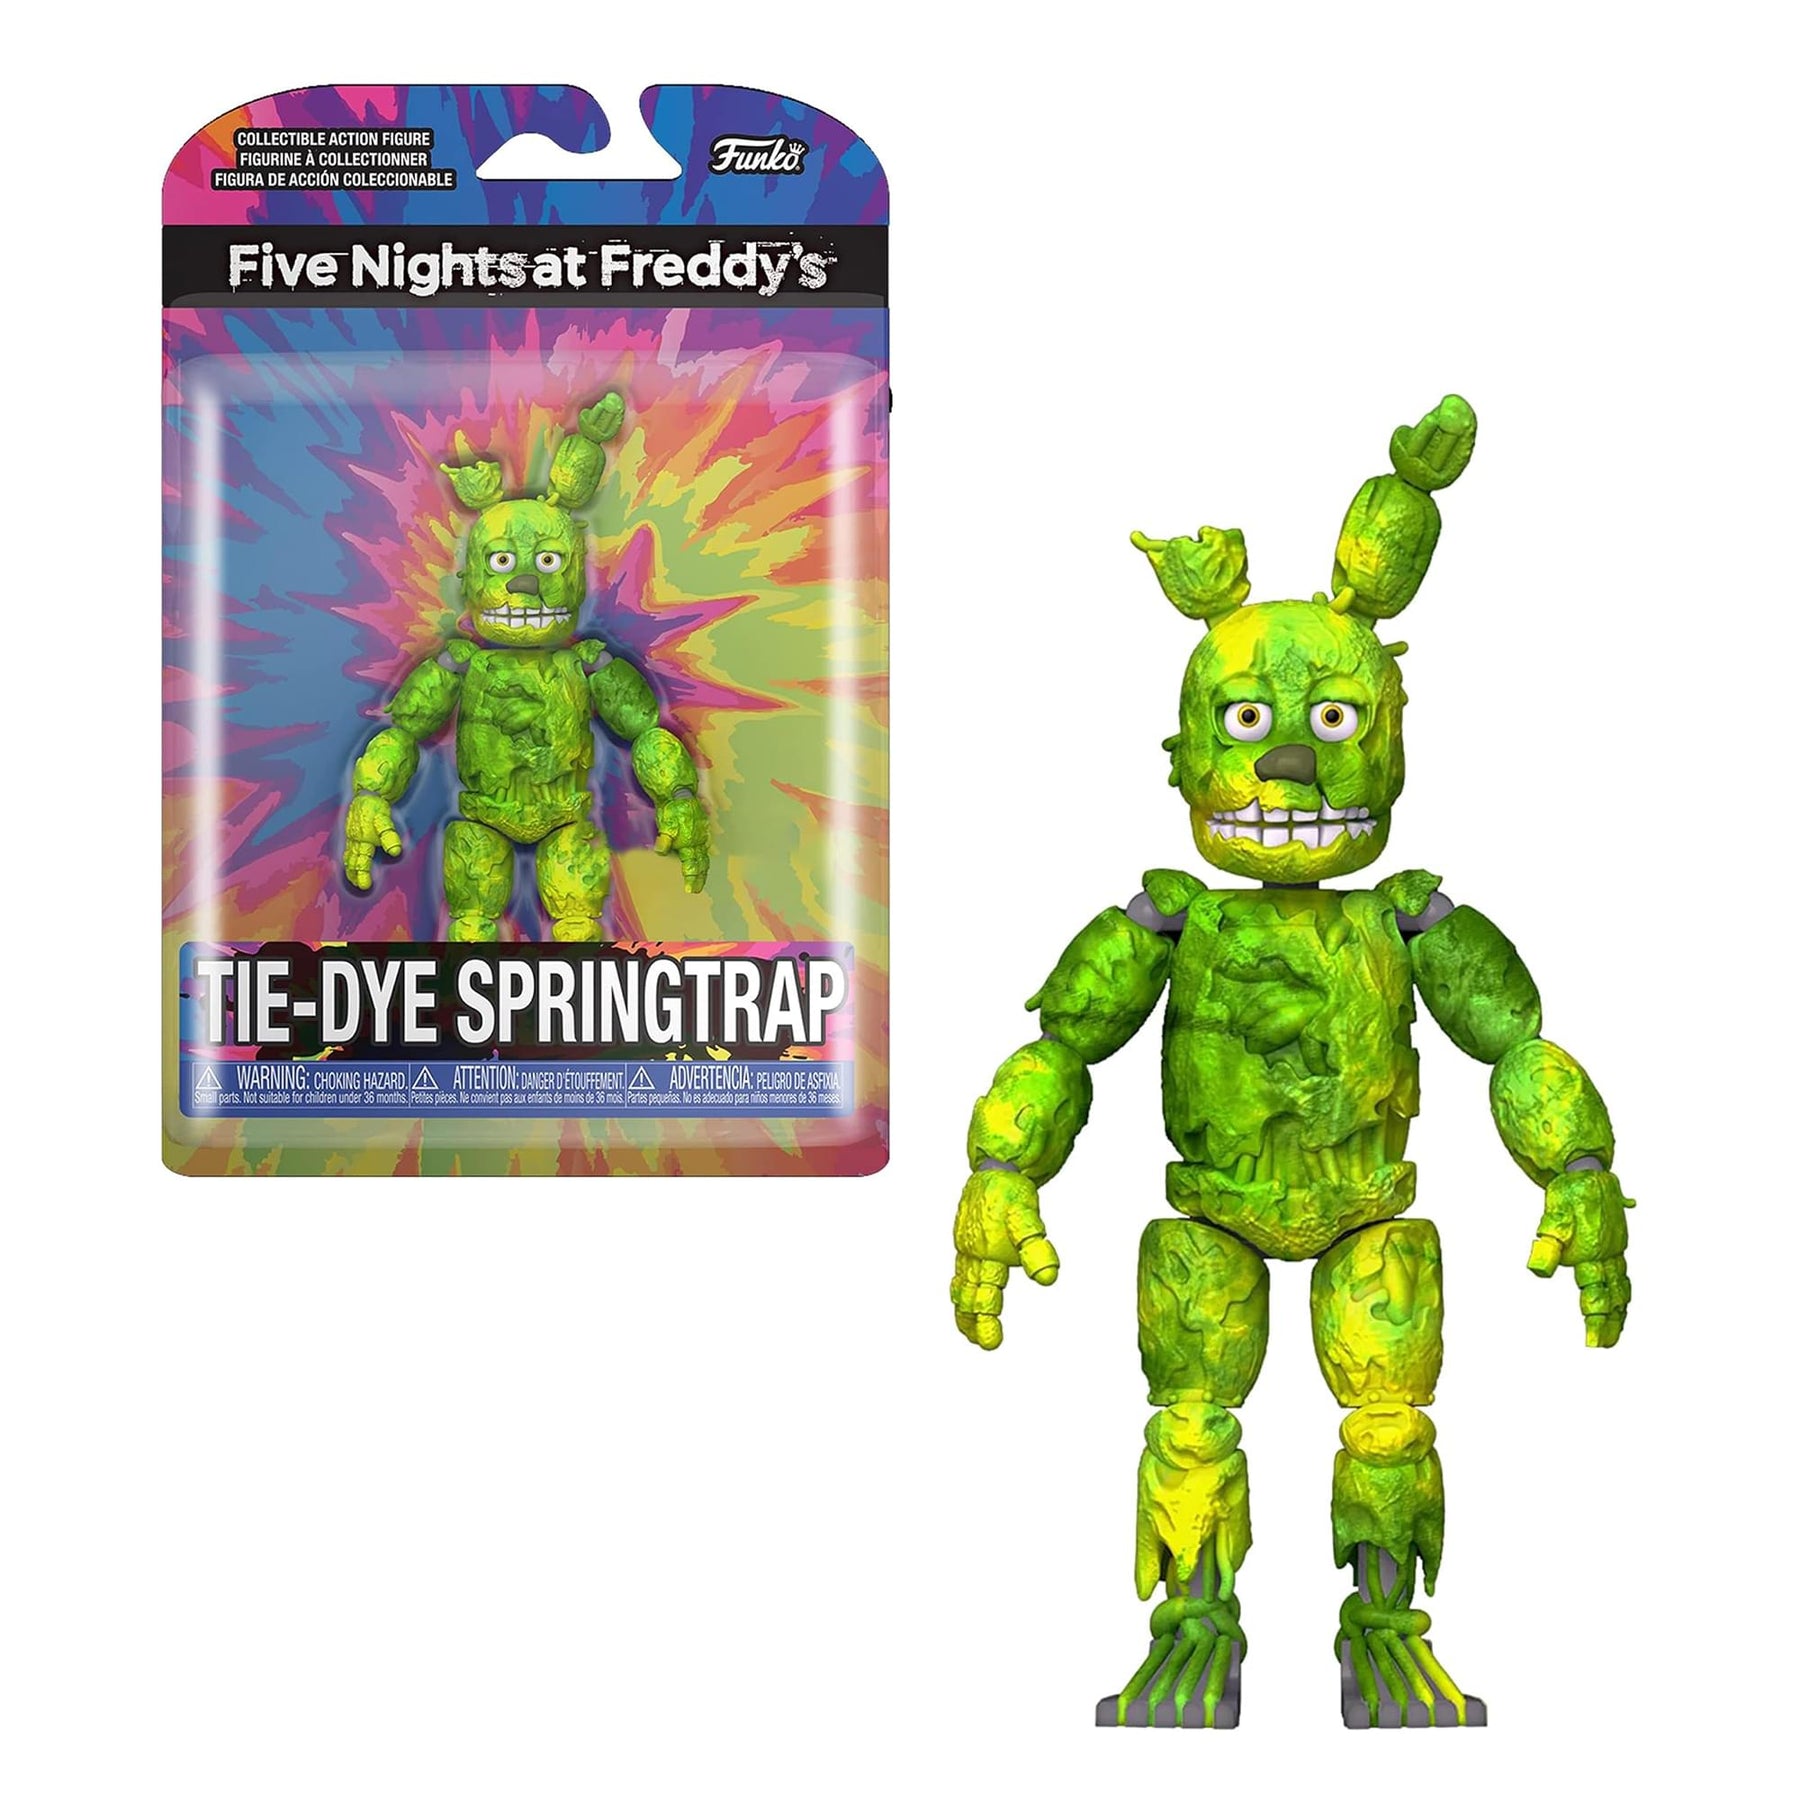 Five Nights At Freddy's 5 Inch Action Figure | Tie-Dye Springtrap